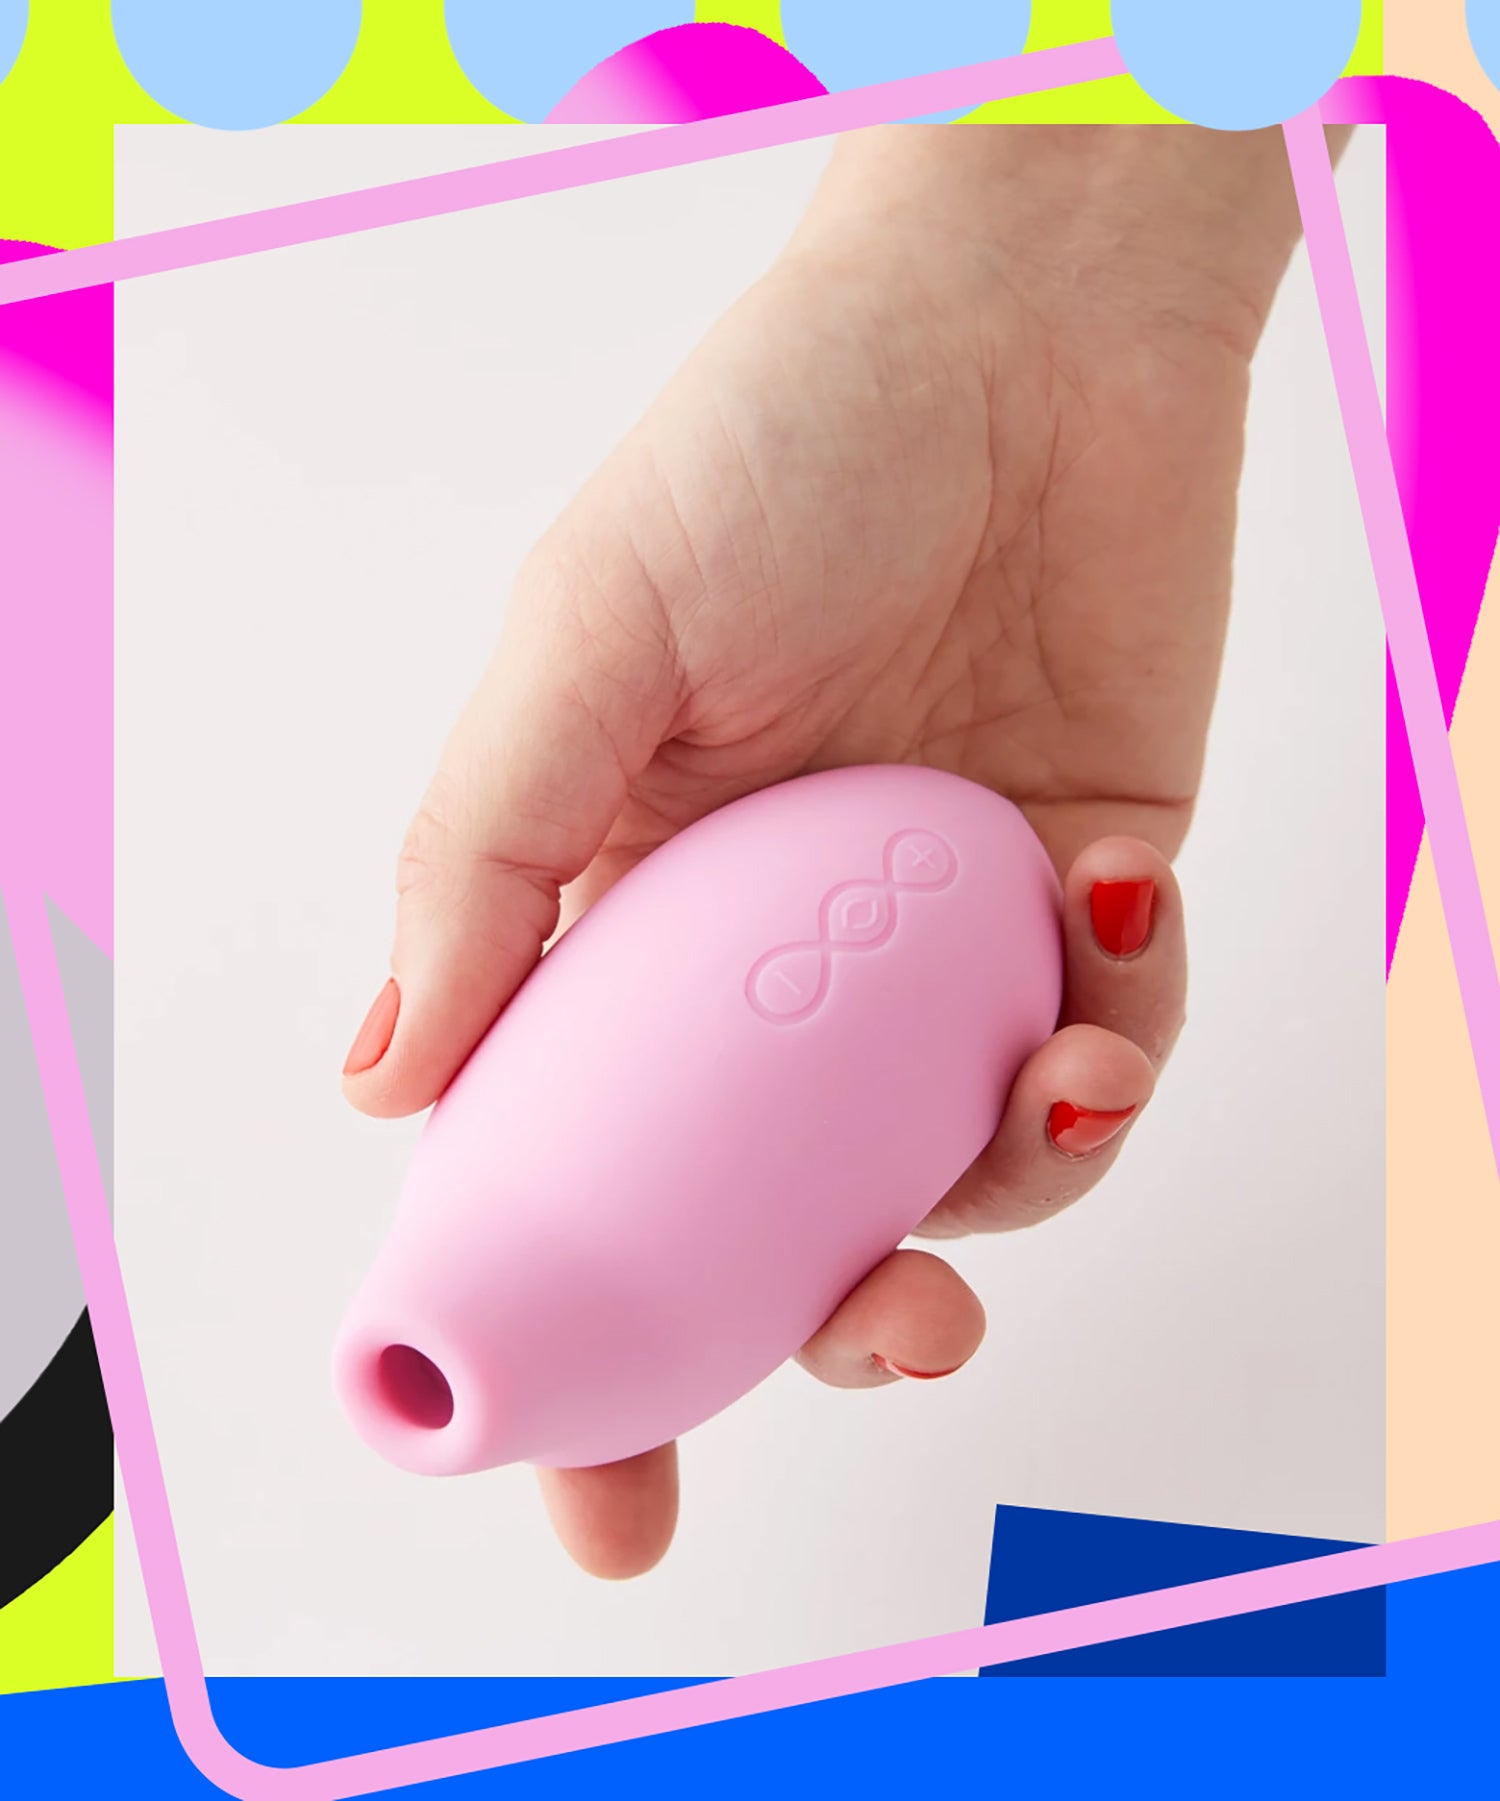 The 7 Best Urban Outfitters Sex Toys and Sexual Wellness